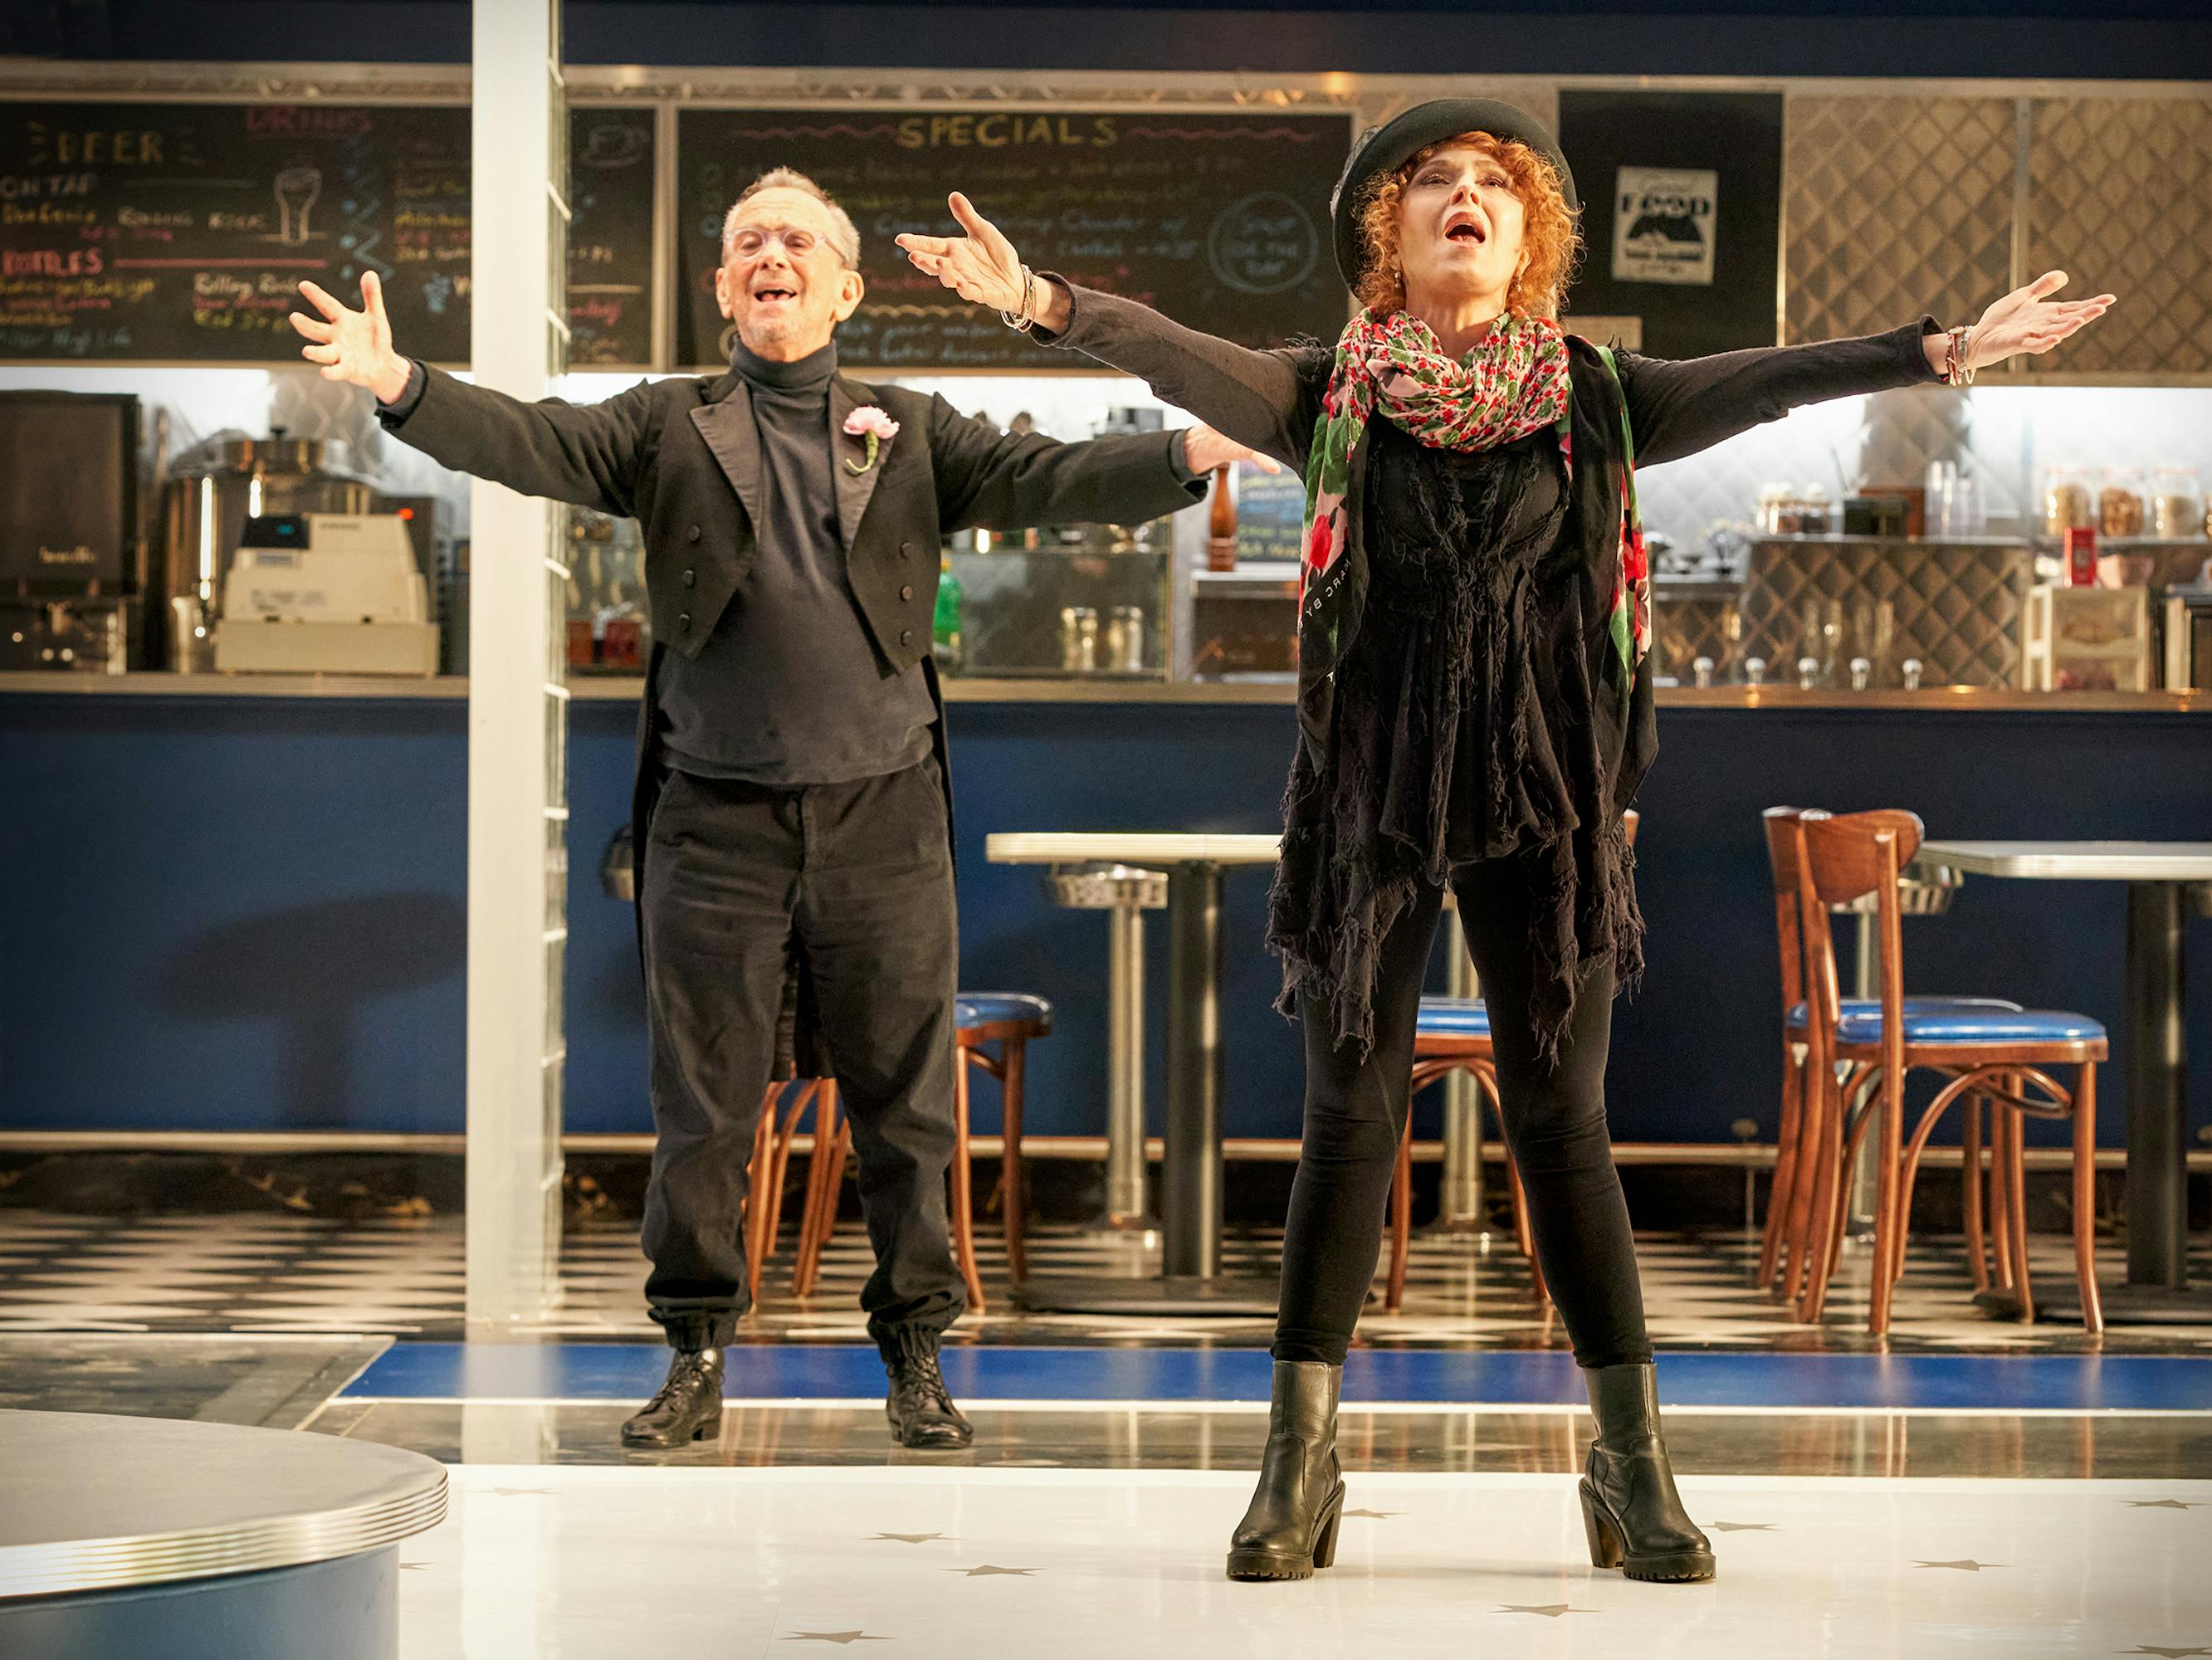 Joel Grey and Bernadette Peters wear all black and raise their arms in song.